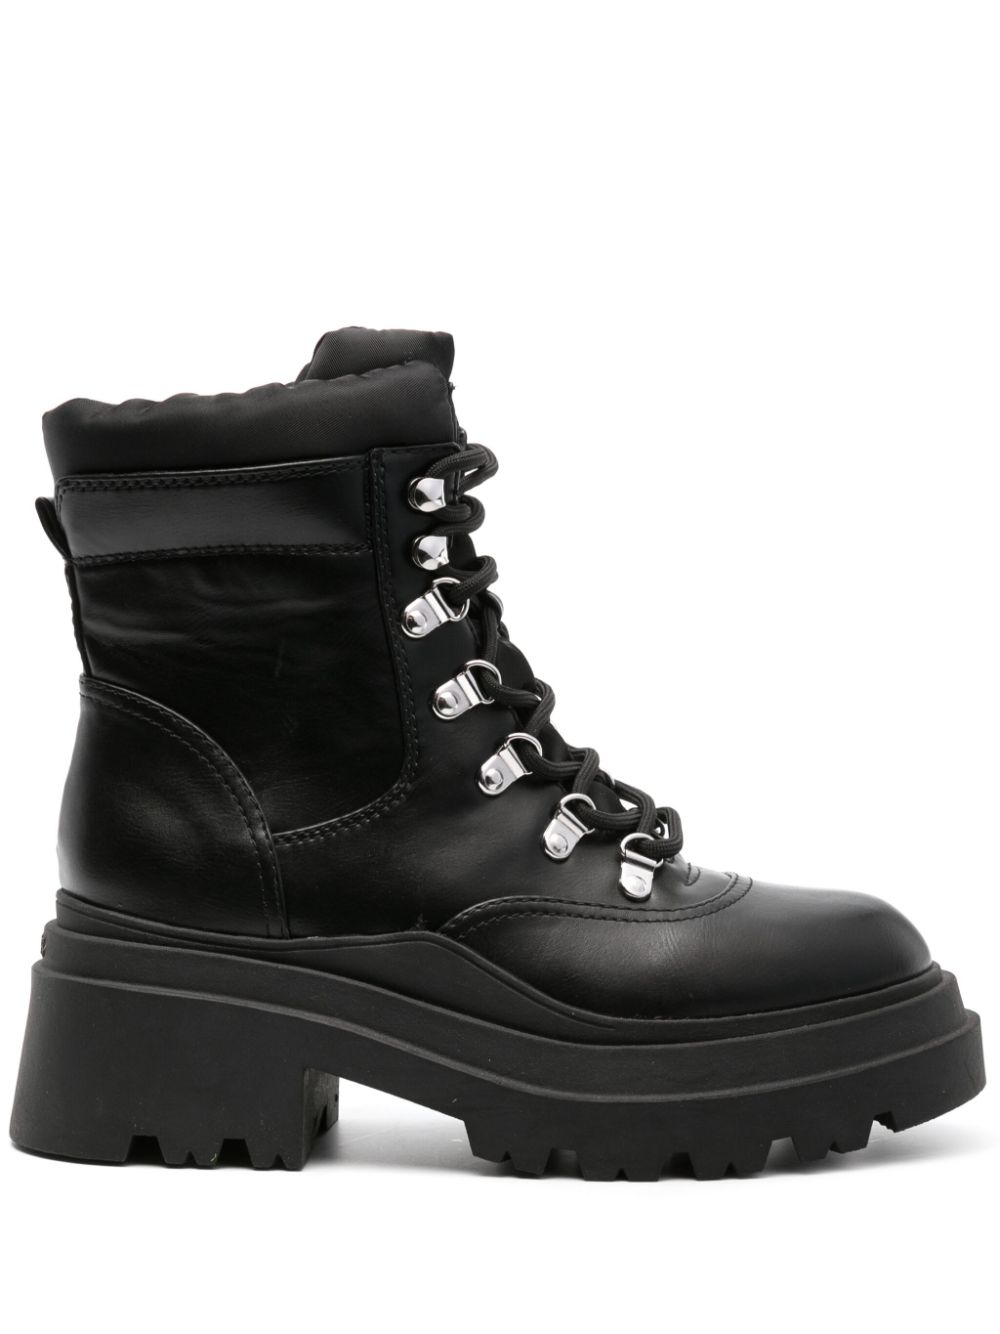 GUESS USA Vaney lace-up combat boots - Black